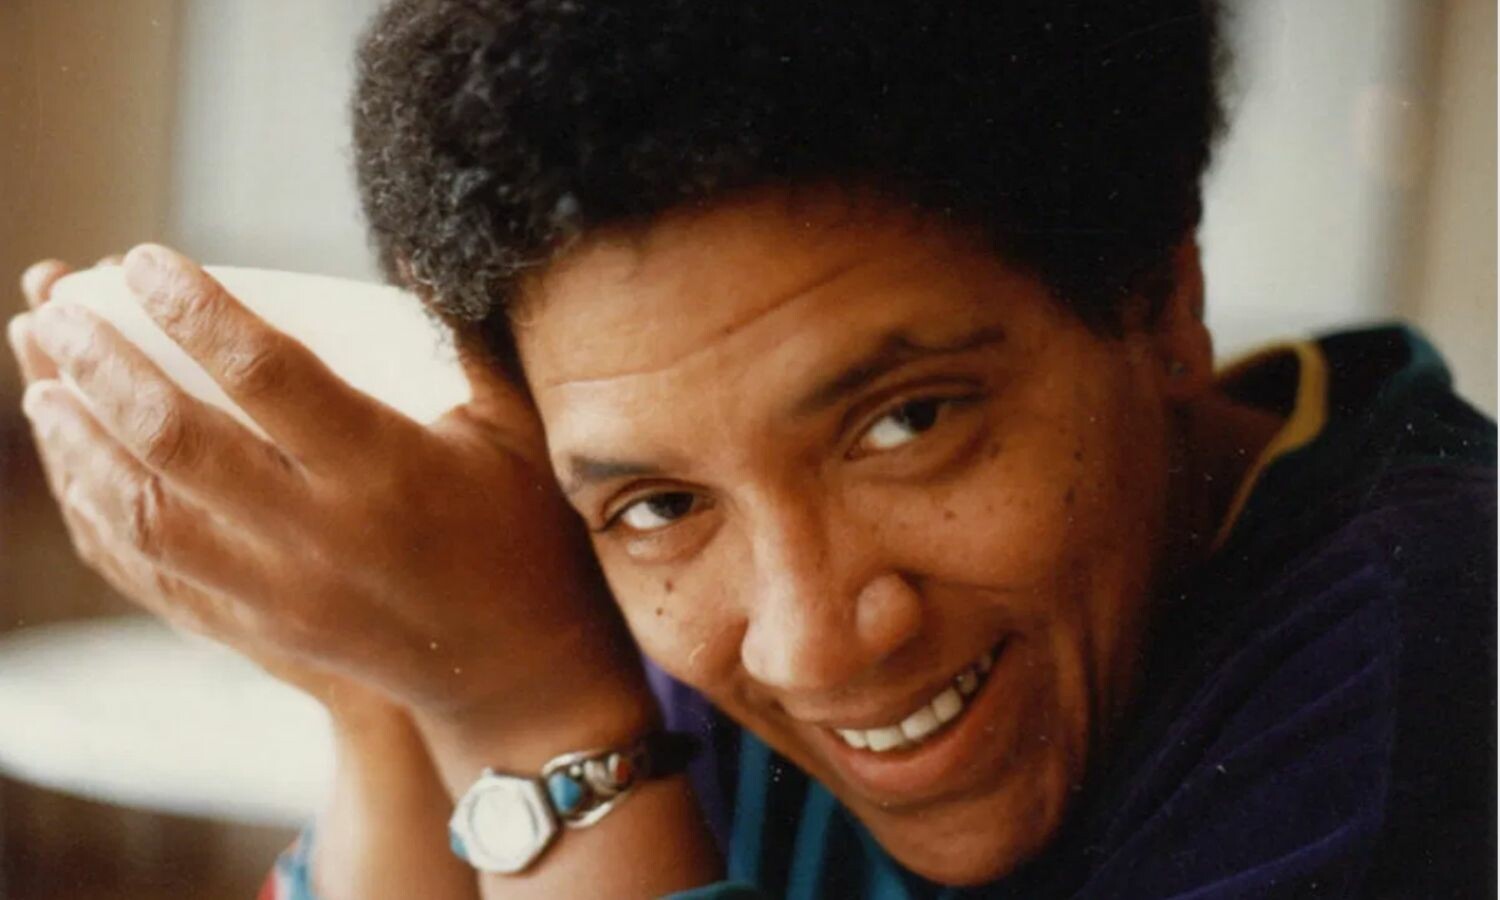 Audre Lorde holding a hollow white object.